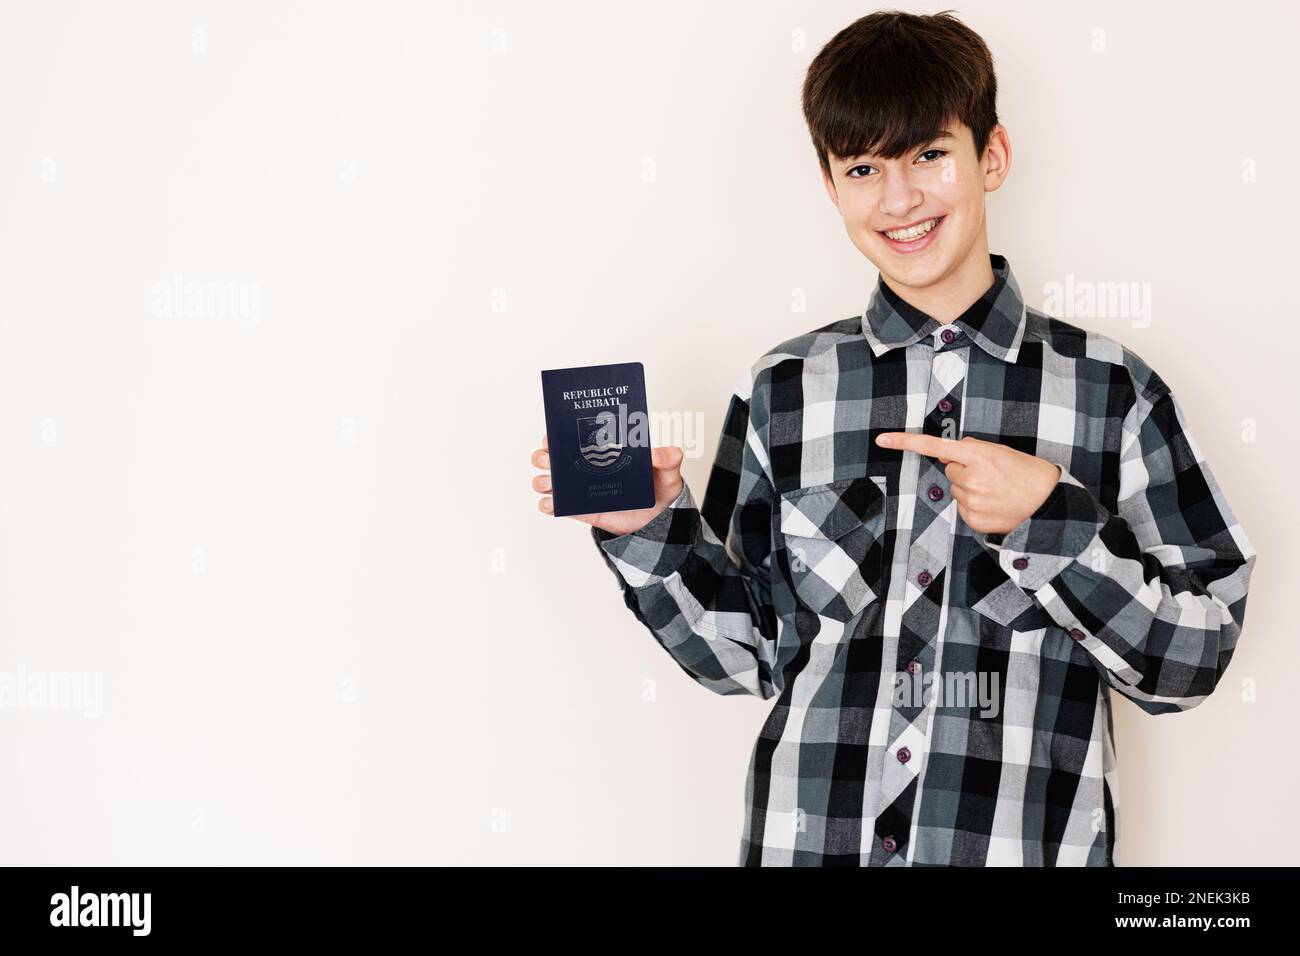 Young teenager boy holding Kiribati passport looking positive and happy standing and smiling with a confident smile against white background. Stock Photo